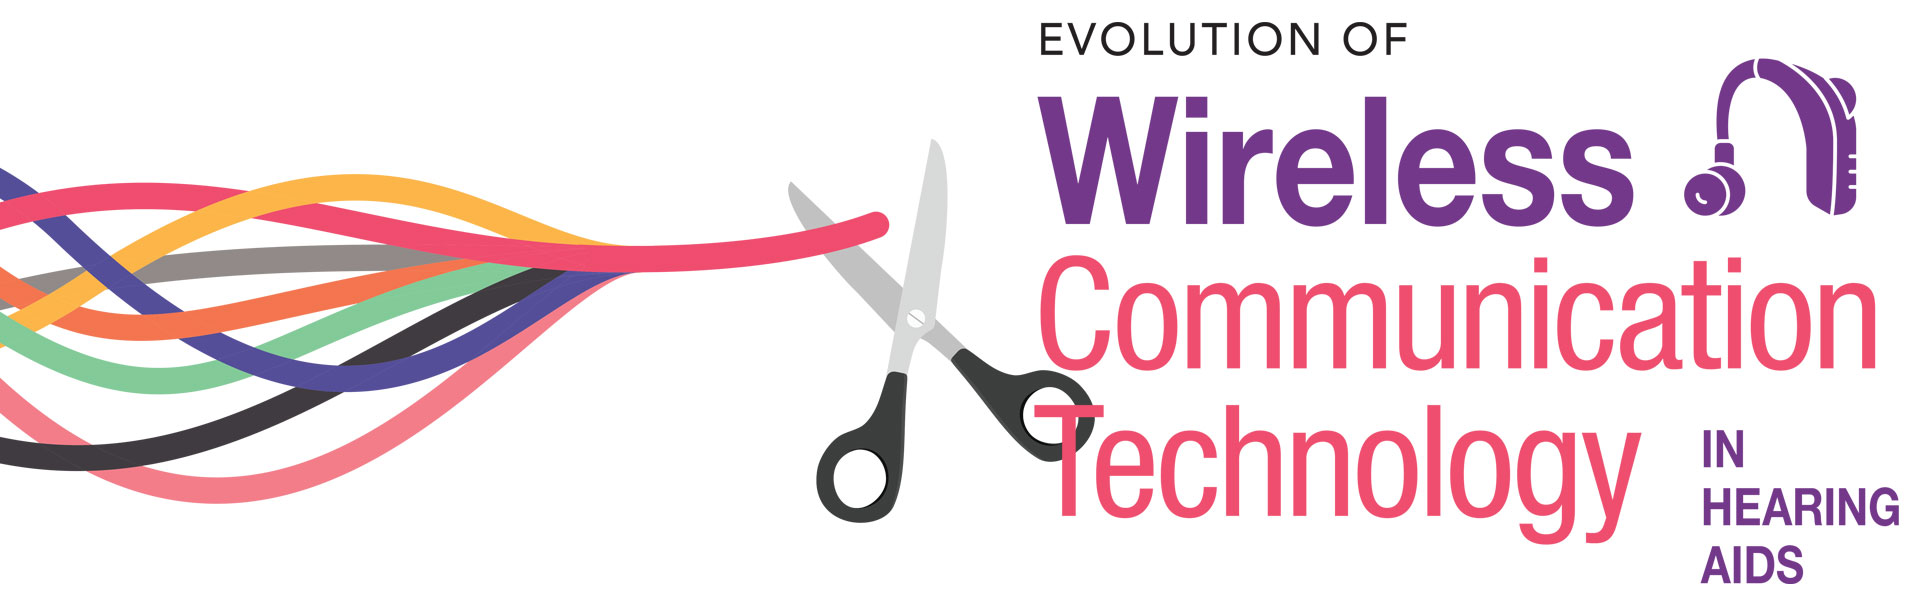 Evolution of Wireless Communication Technology in Hearing Aids